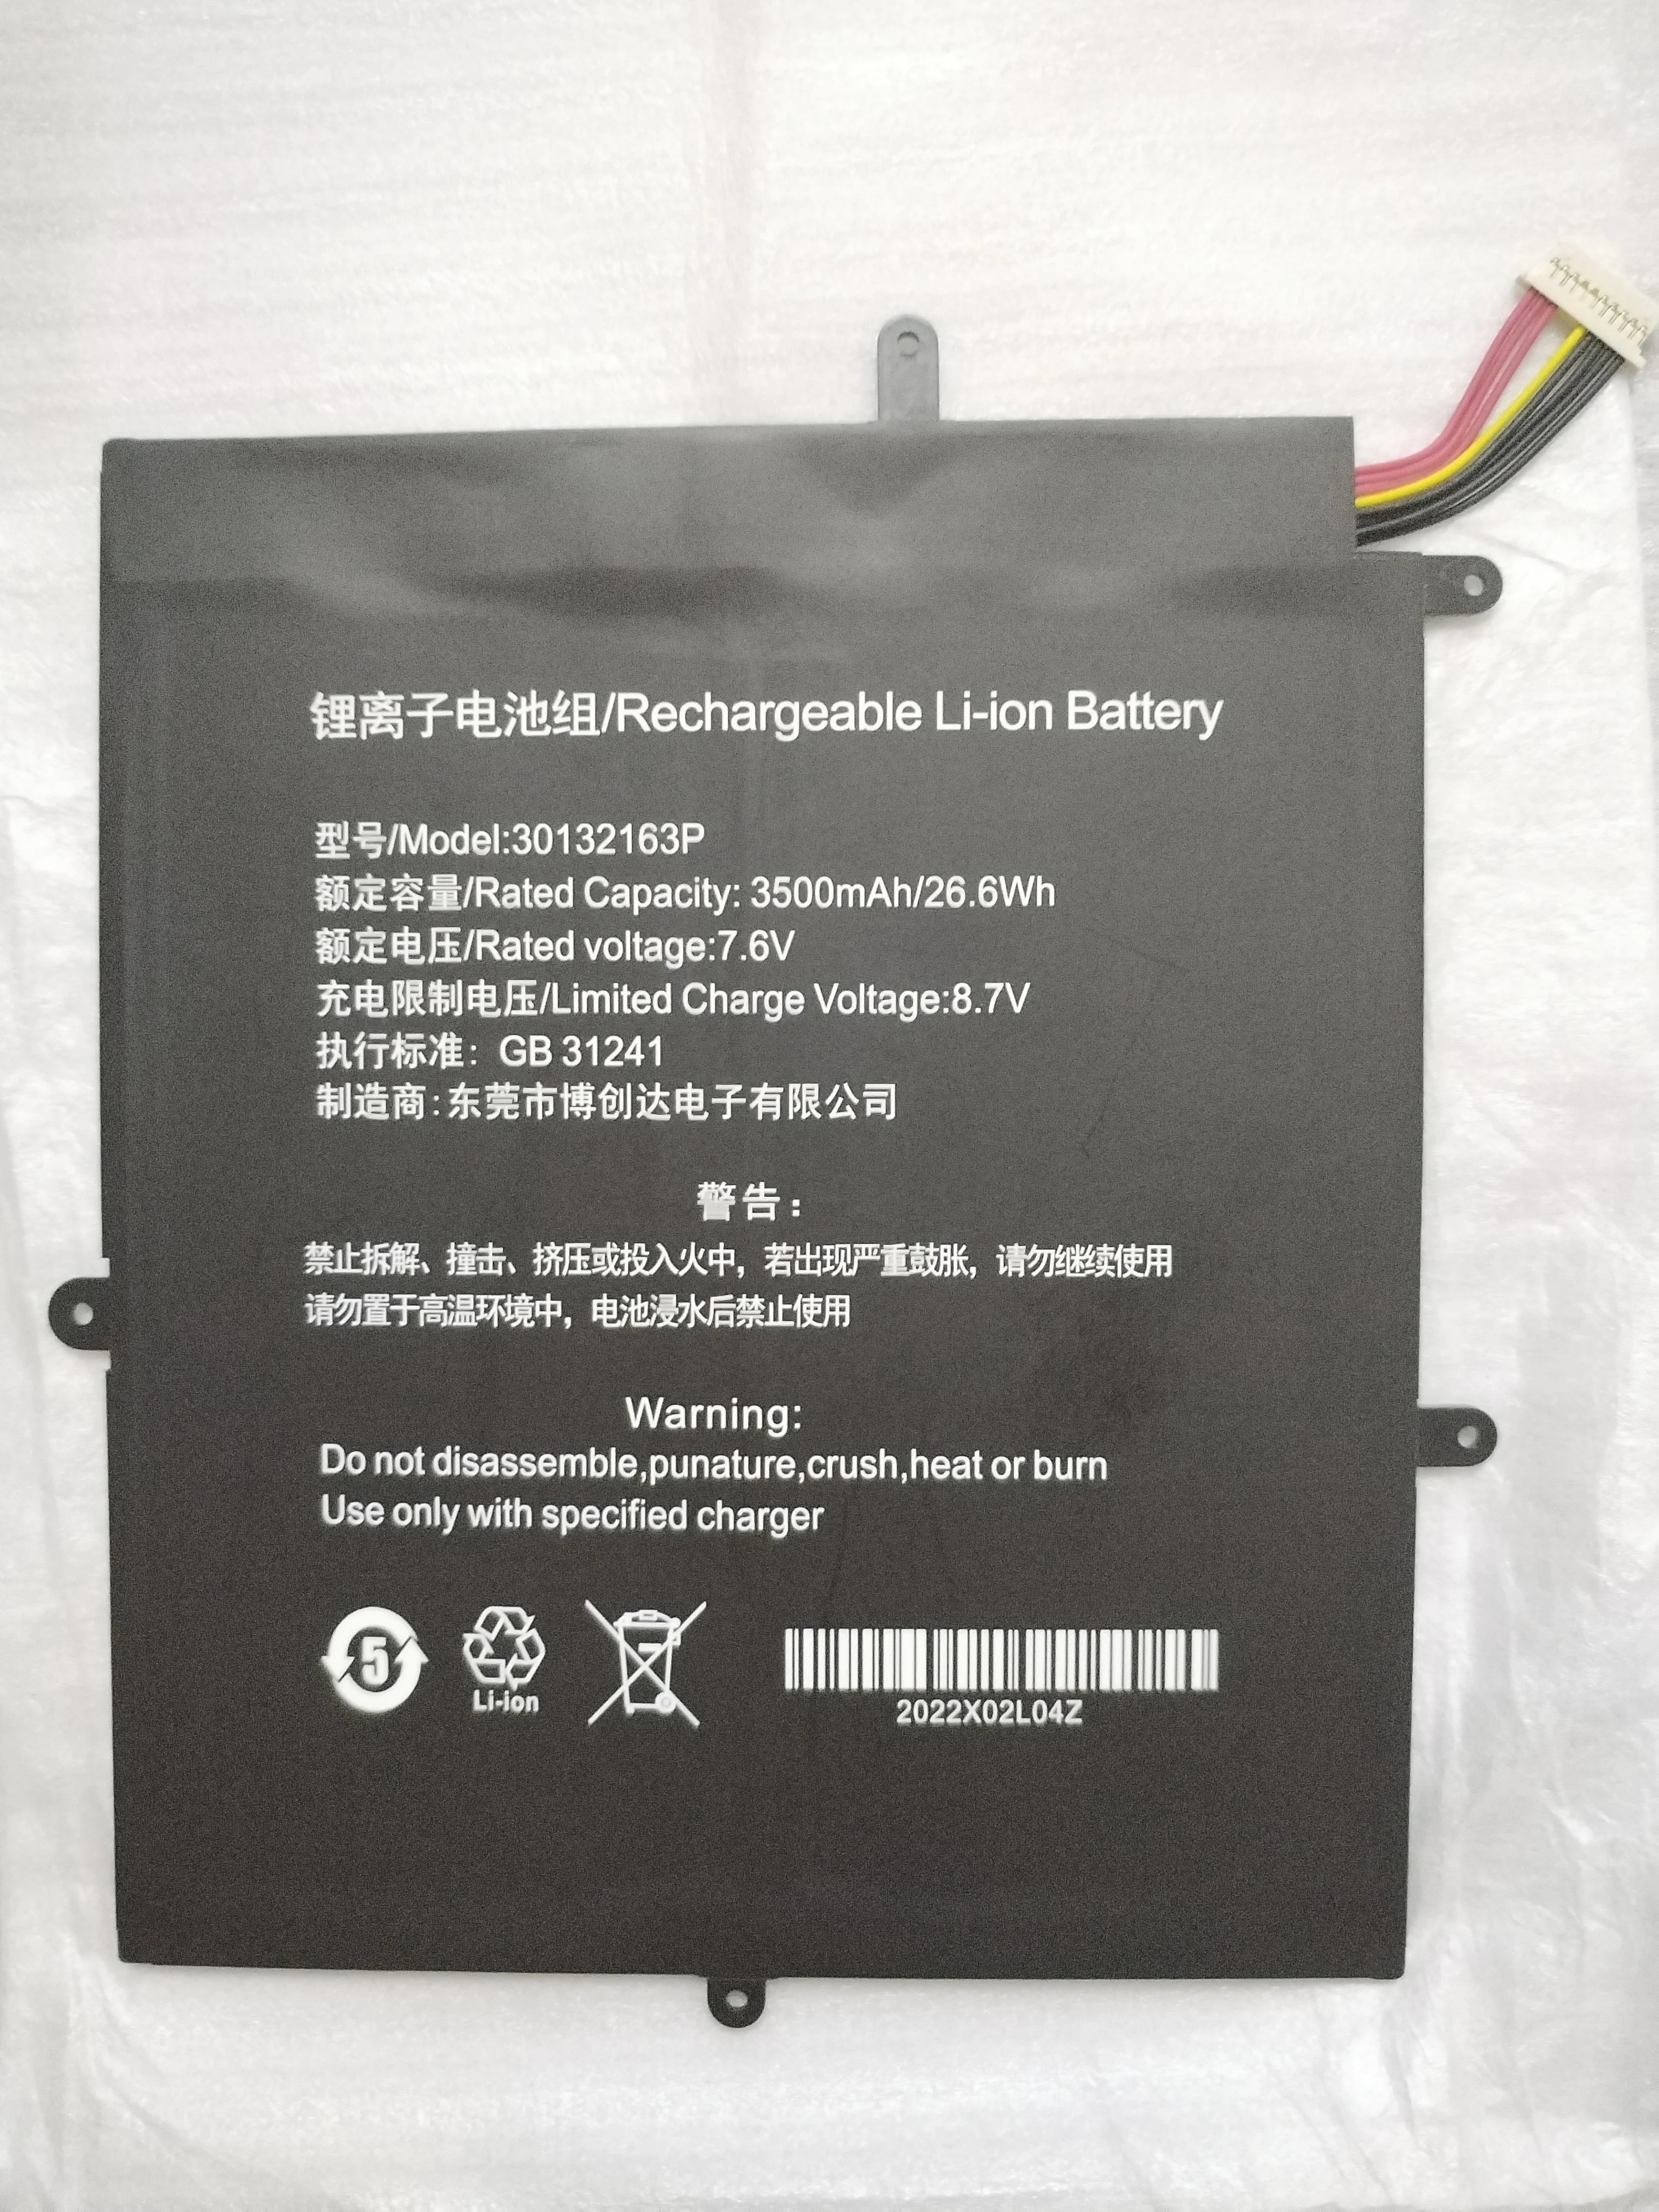 

New 26.6Wh 30132163P H-30137162P Laptop Battery For TECLAST F5 2666144 NV-2778130-2S For JUMPER Ezbook X1